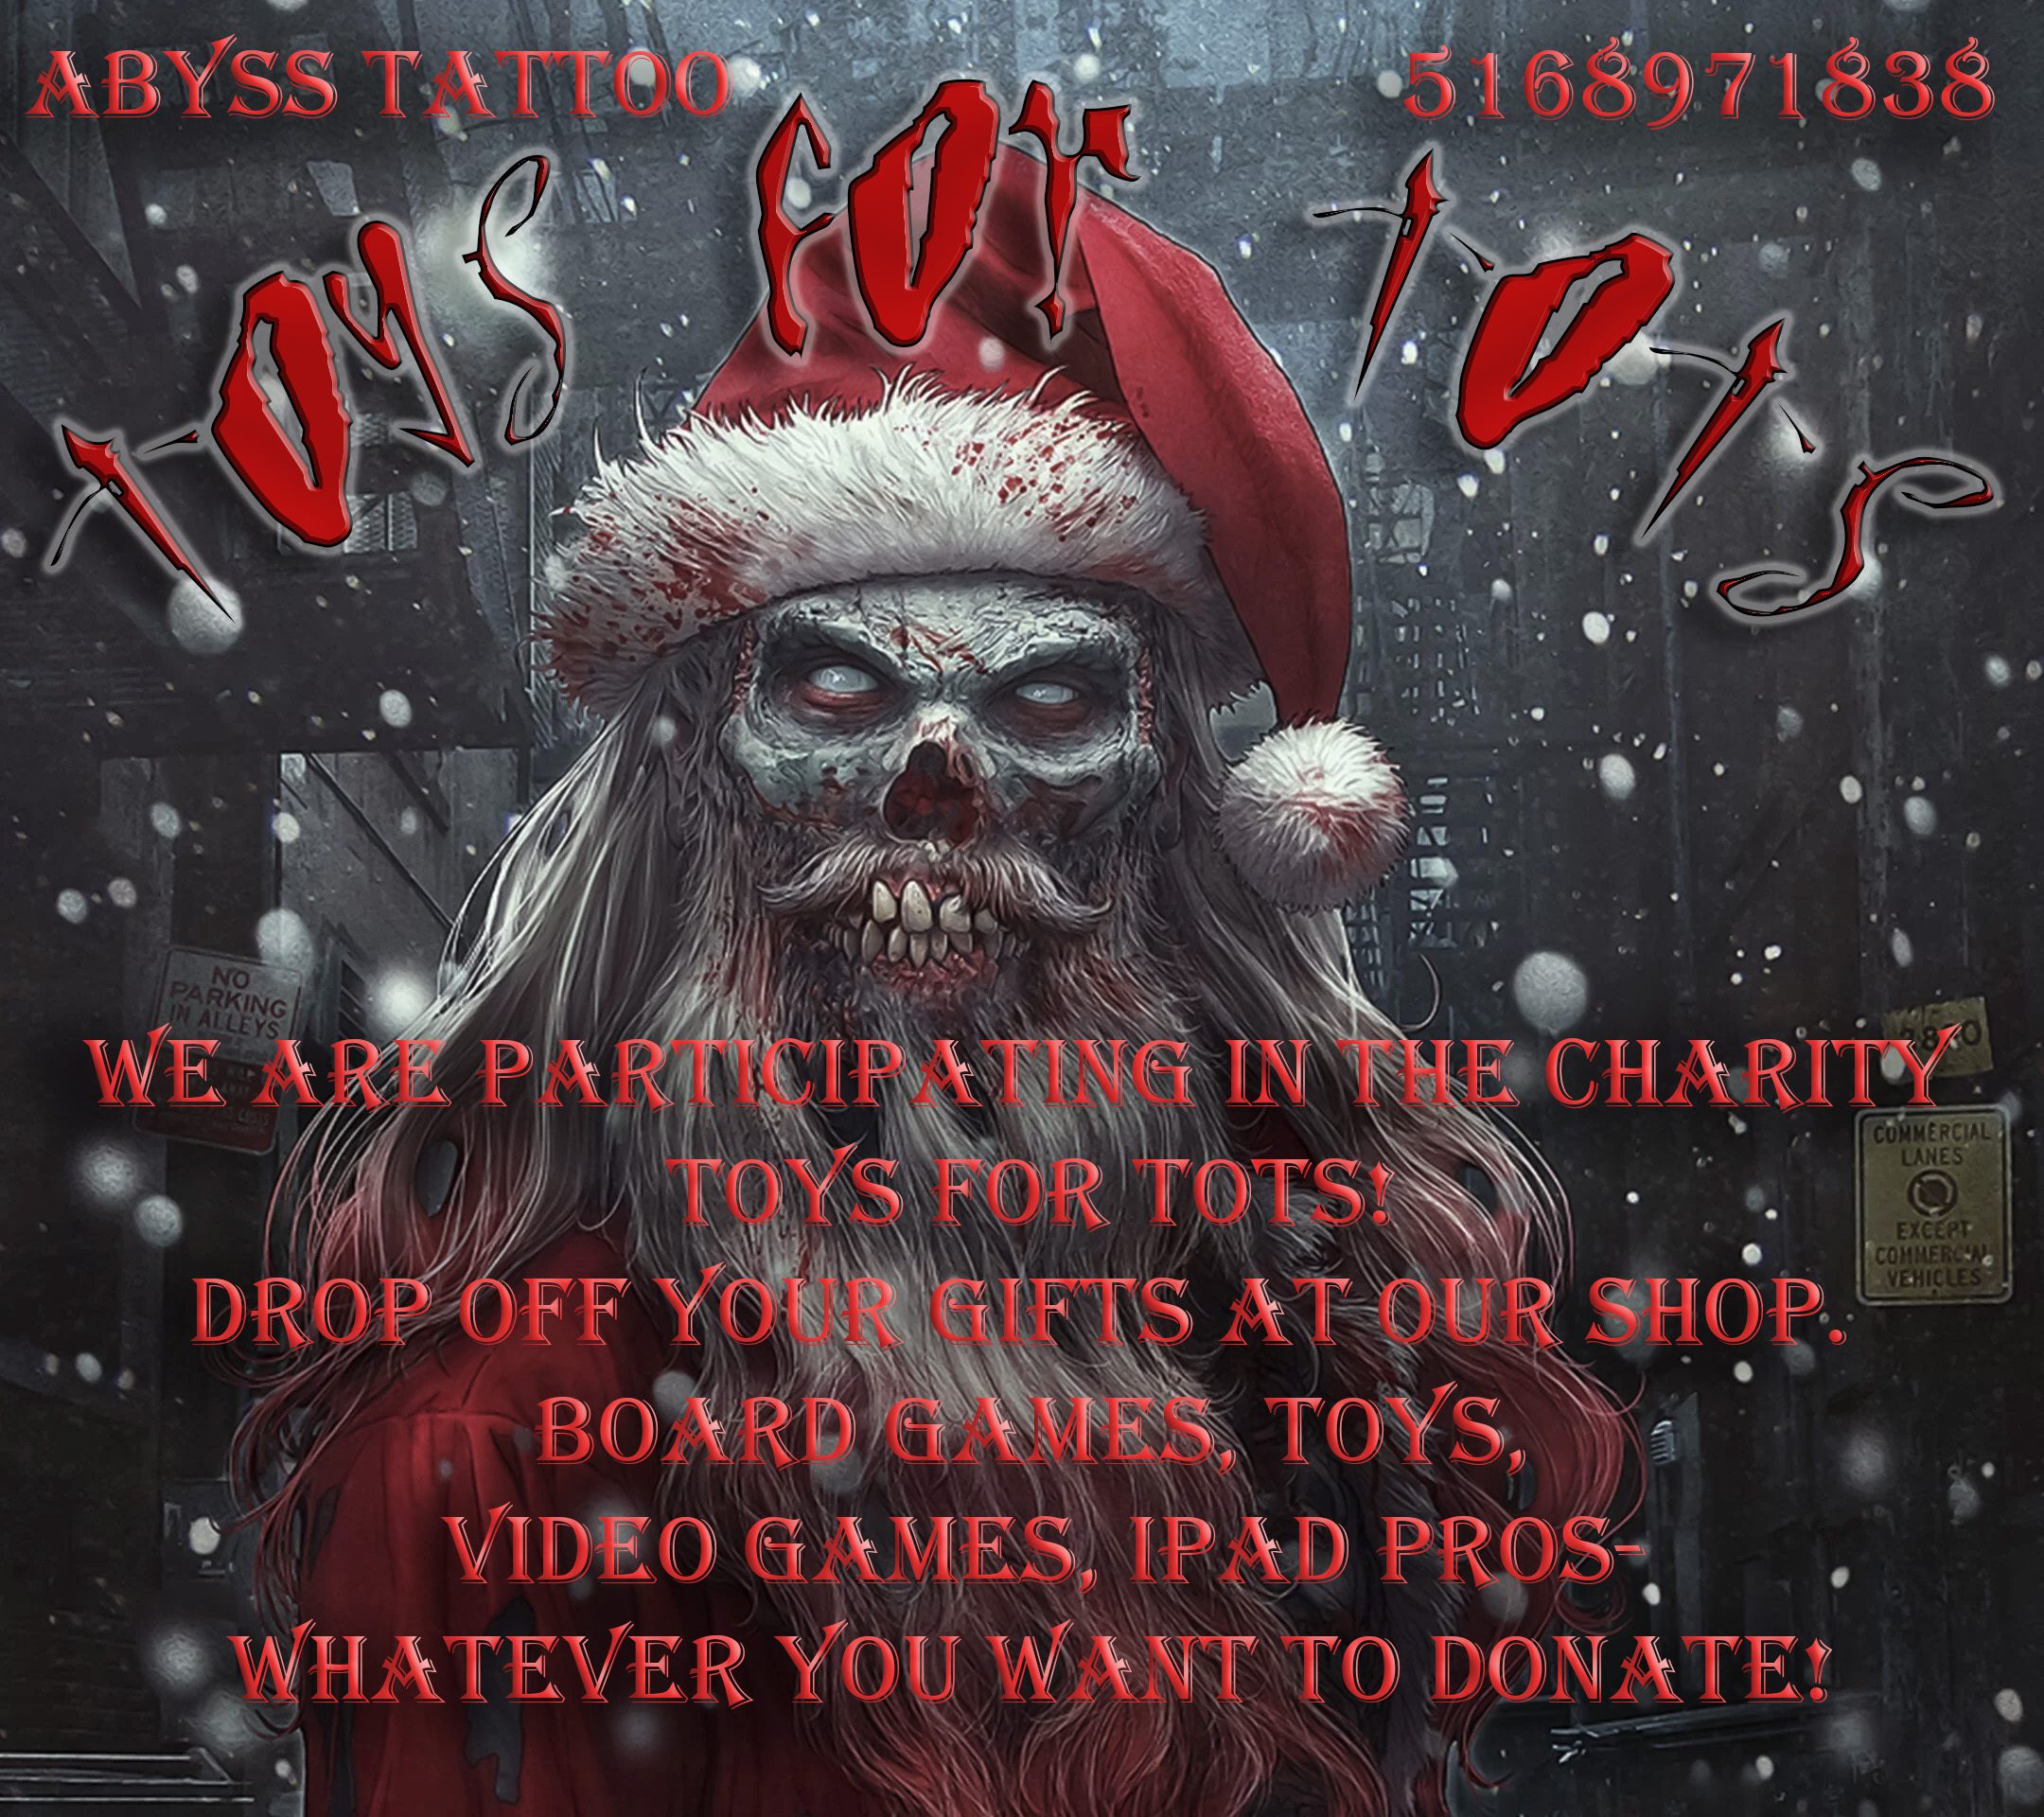 Toys For Tots!